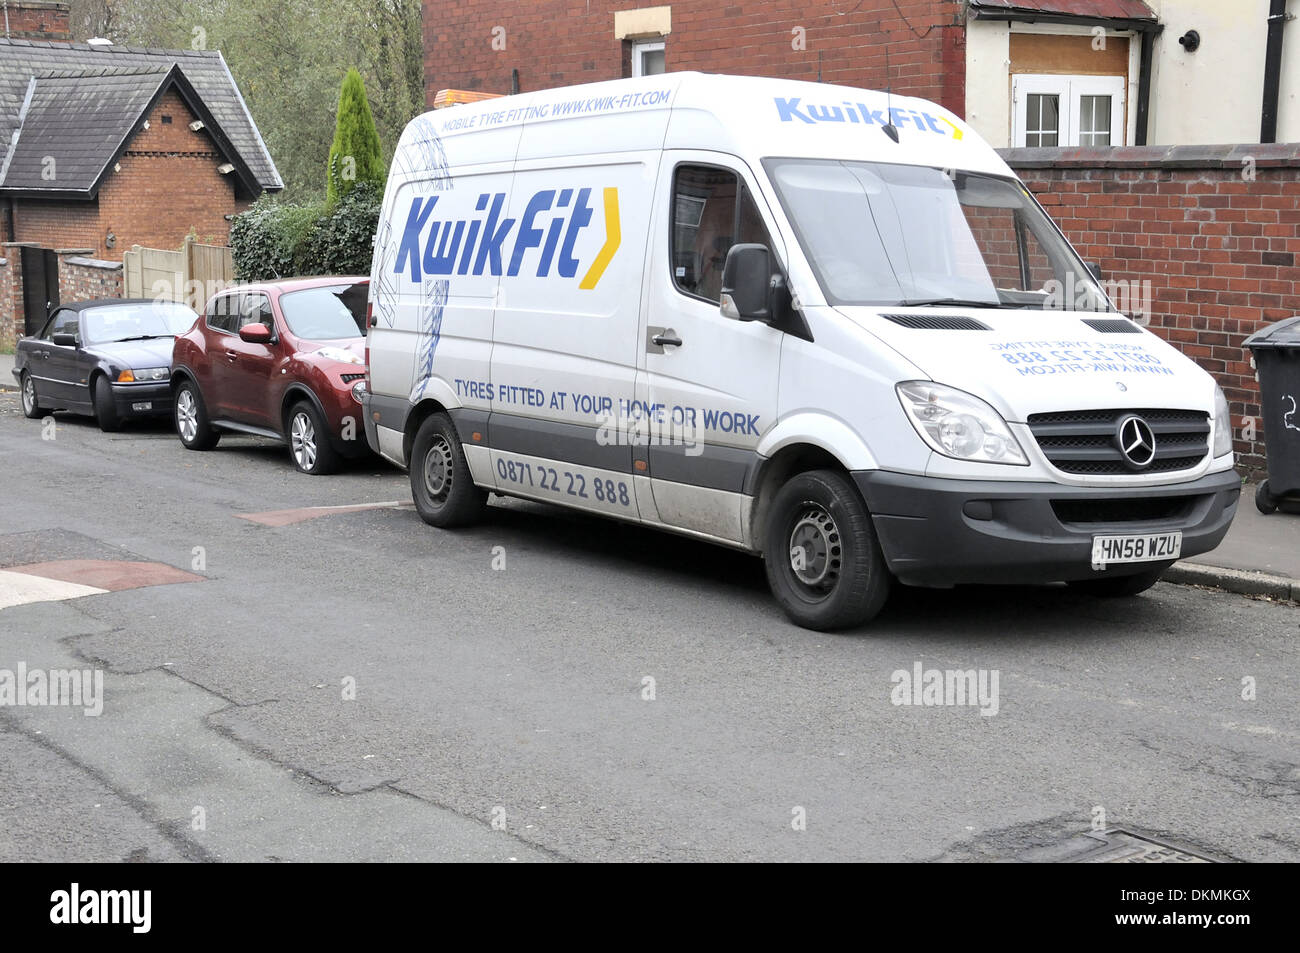 Kwik Fit Mobile Fitting Service – What's in the Van?